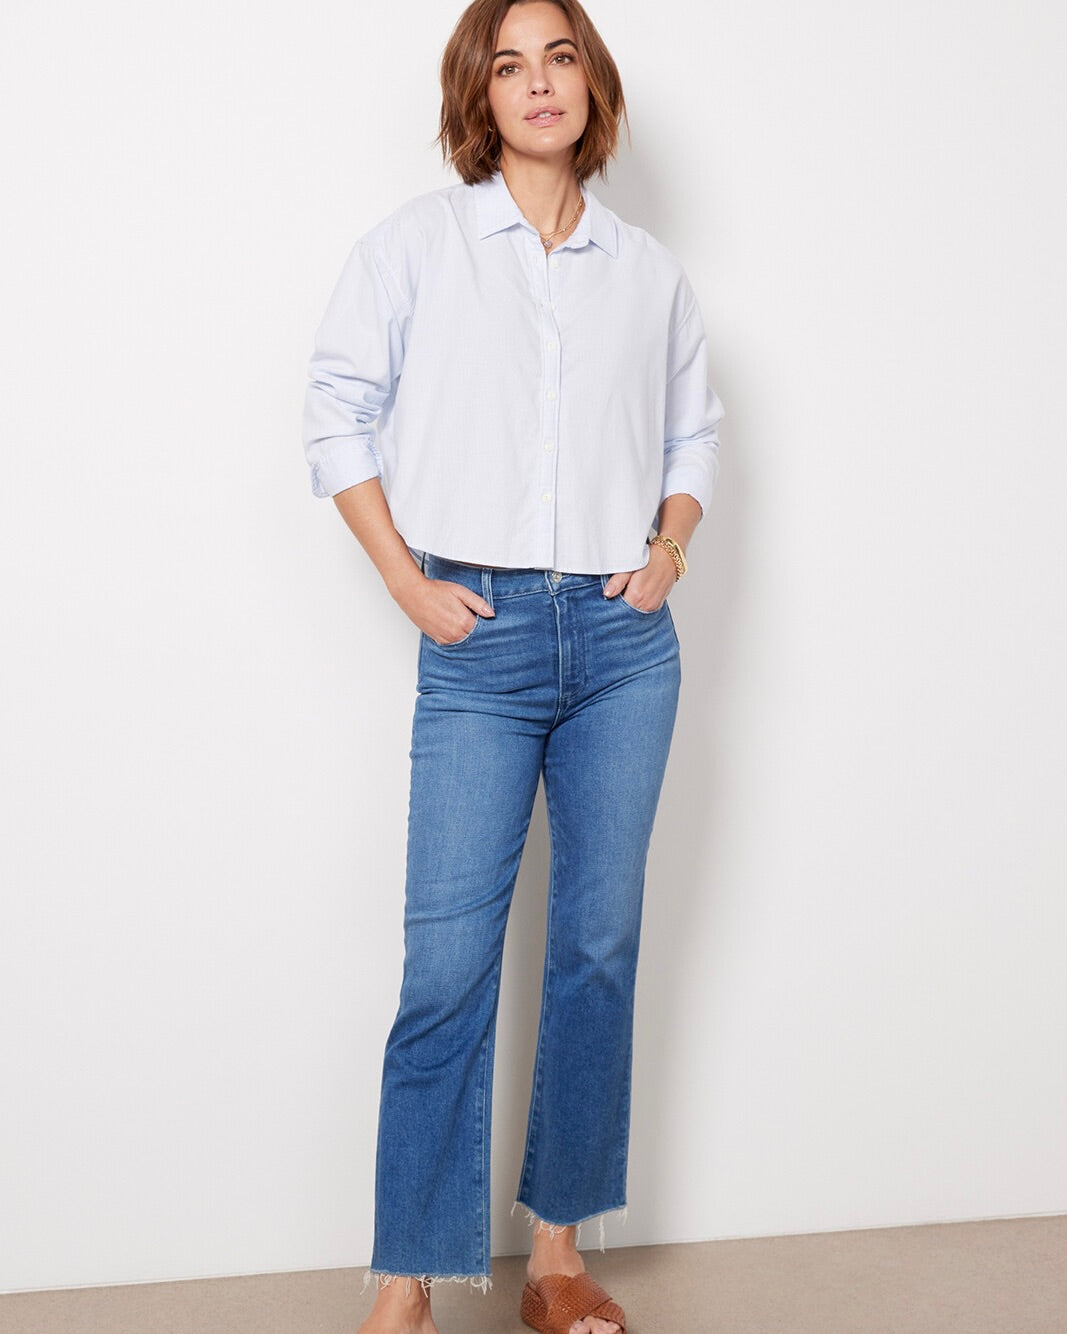 Model wearing Faherty Stretch Oxford Cropped Shirt wearing jeans on a white background